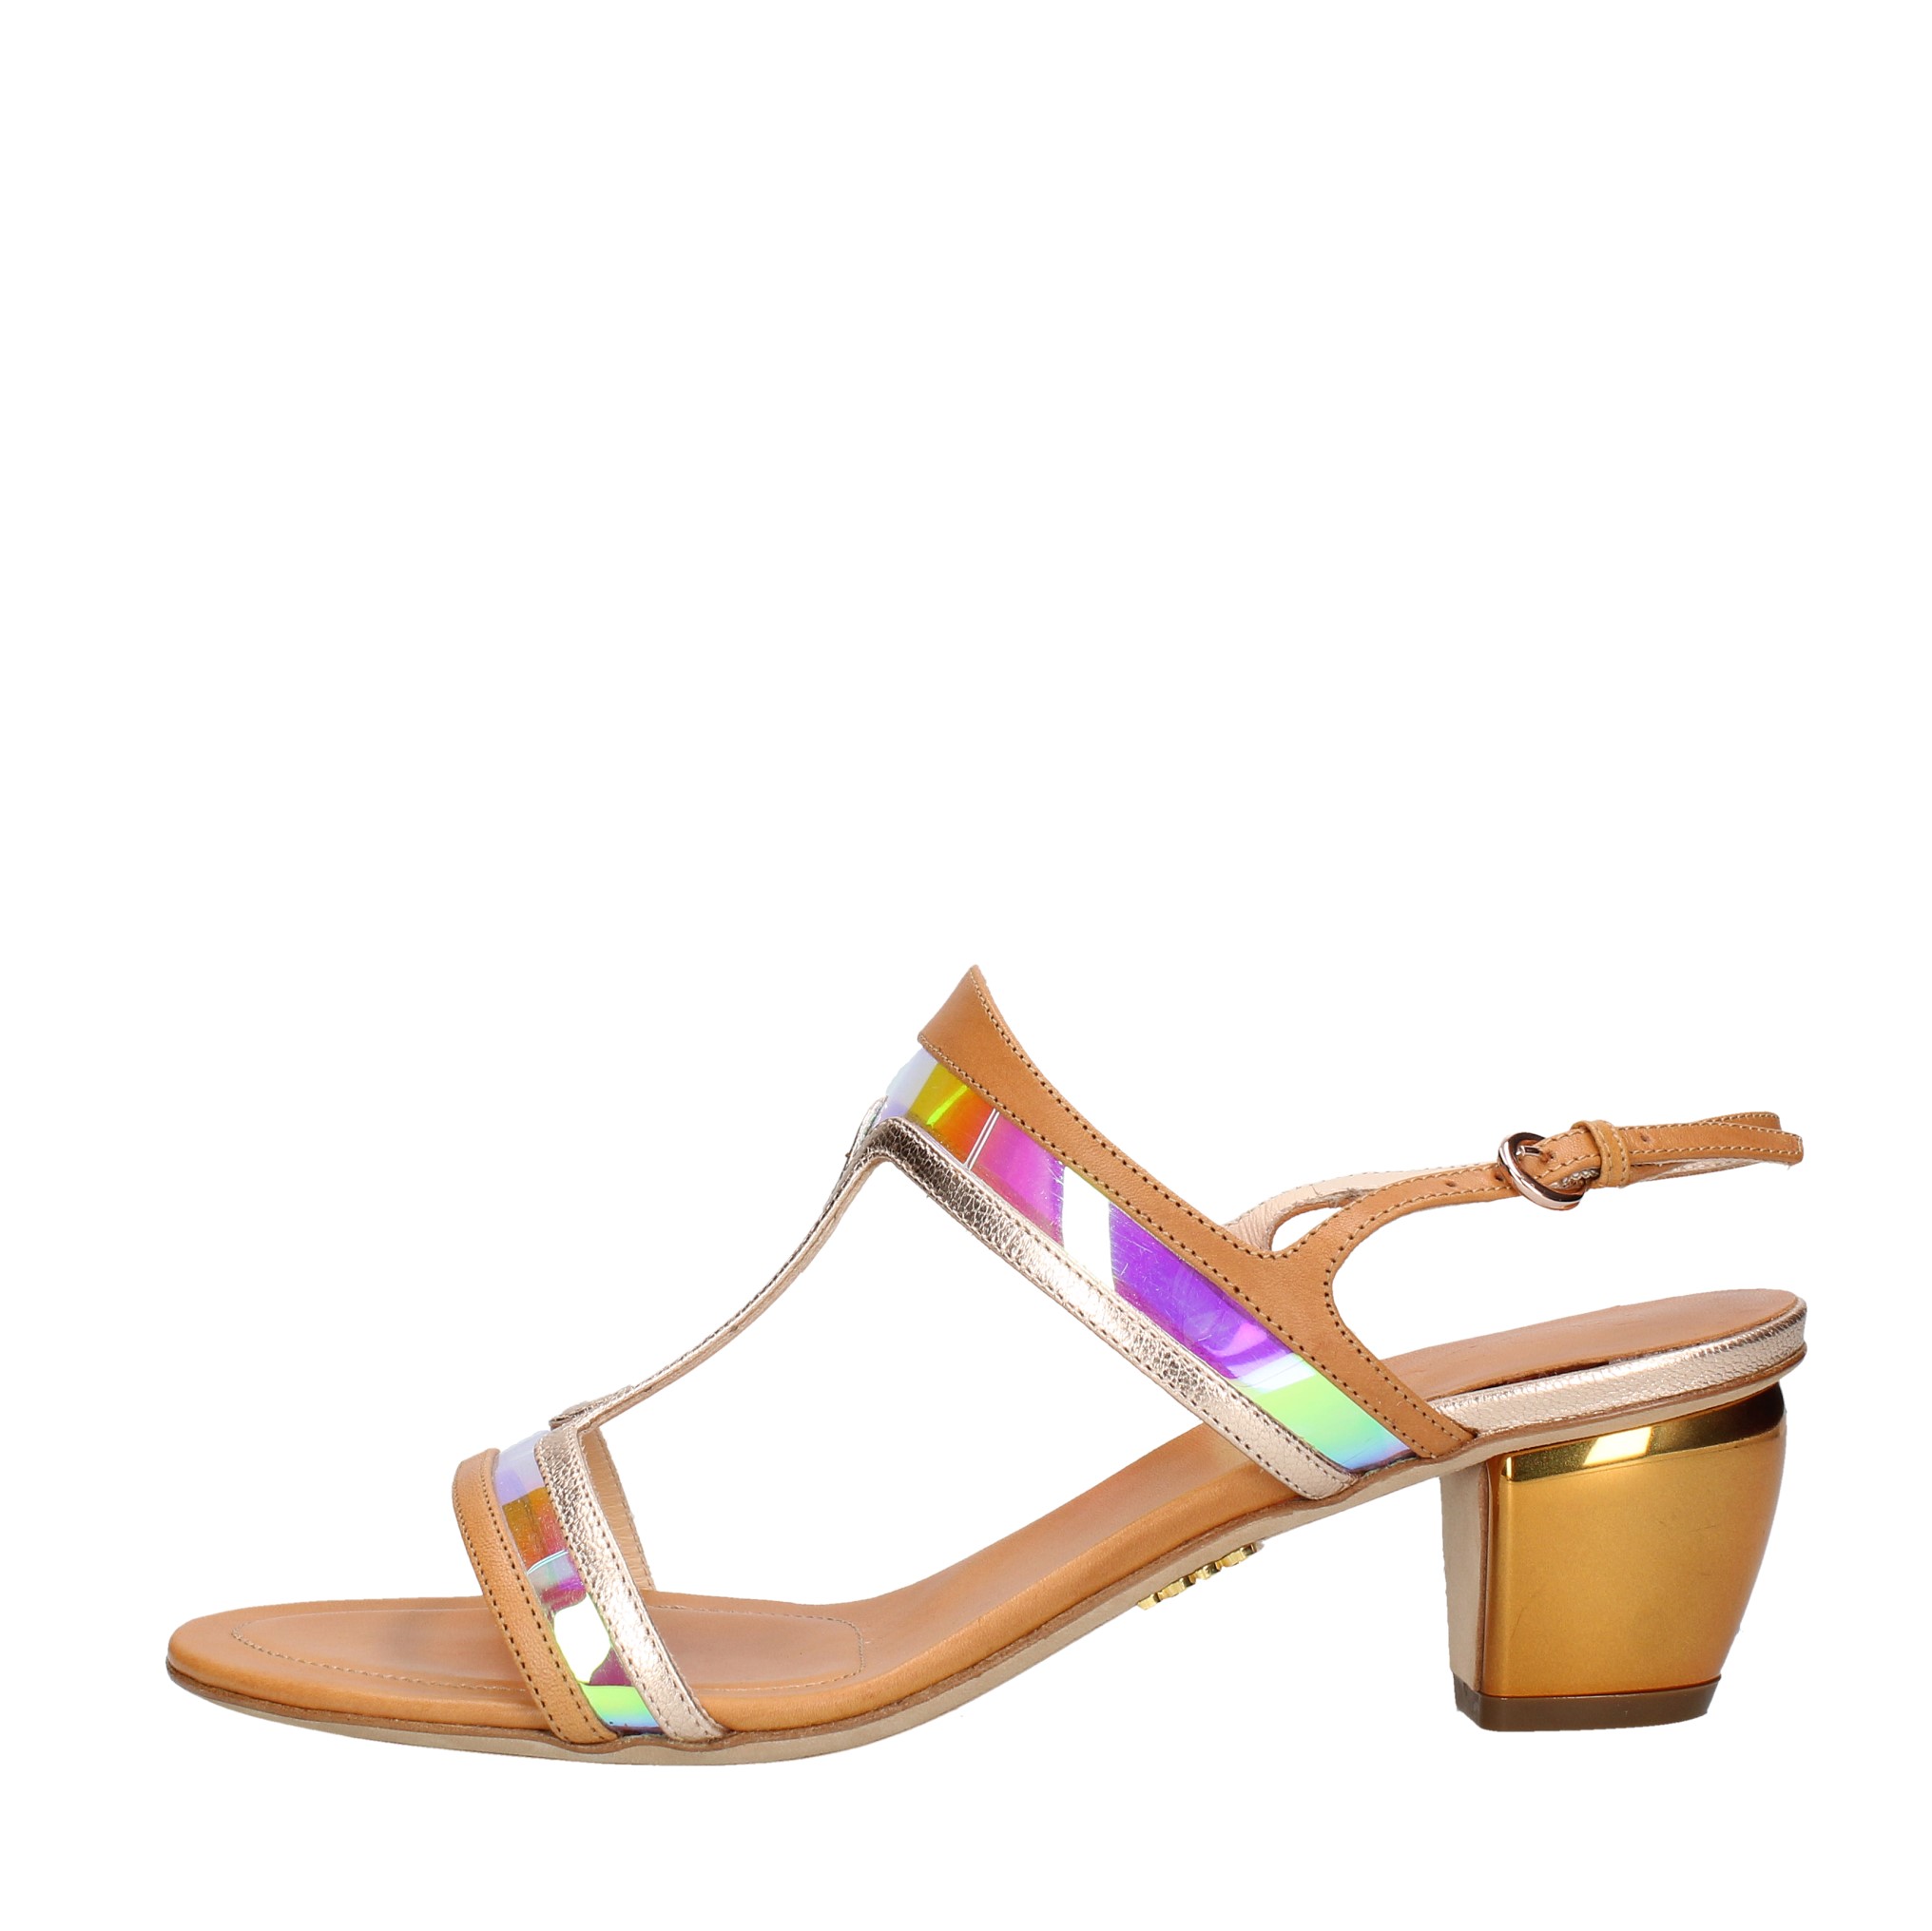 Leather and pvc sandals - RODO - Ginevra calzature